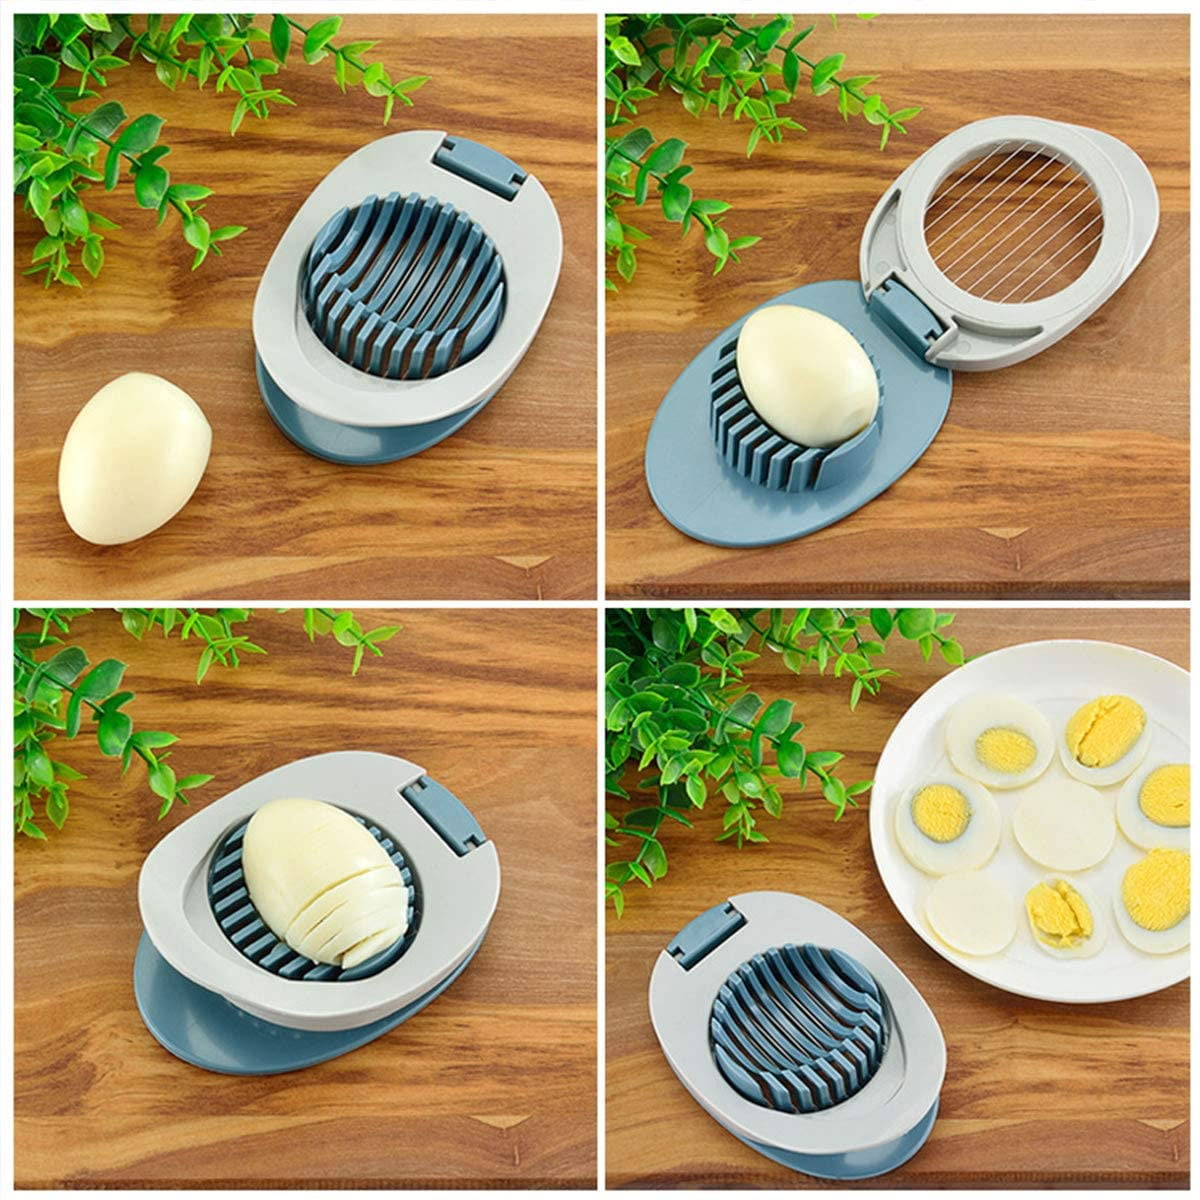 Dropship Kitchen Cutter Wire Egg Slicer With Stainless Steel Wire For Hard  Boiled Eggs; 2 In 1 Stainless Steel Egg Slicer Cutter For Strawberries;  Kiwis; Sausage (Red) to Sell Online at a